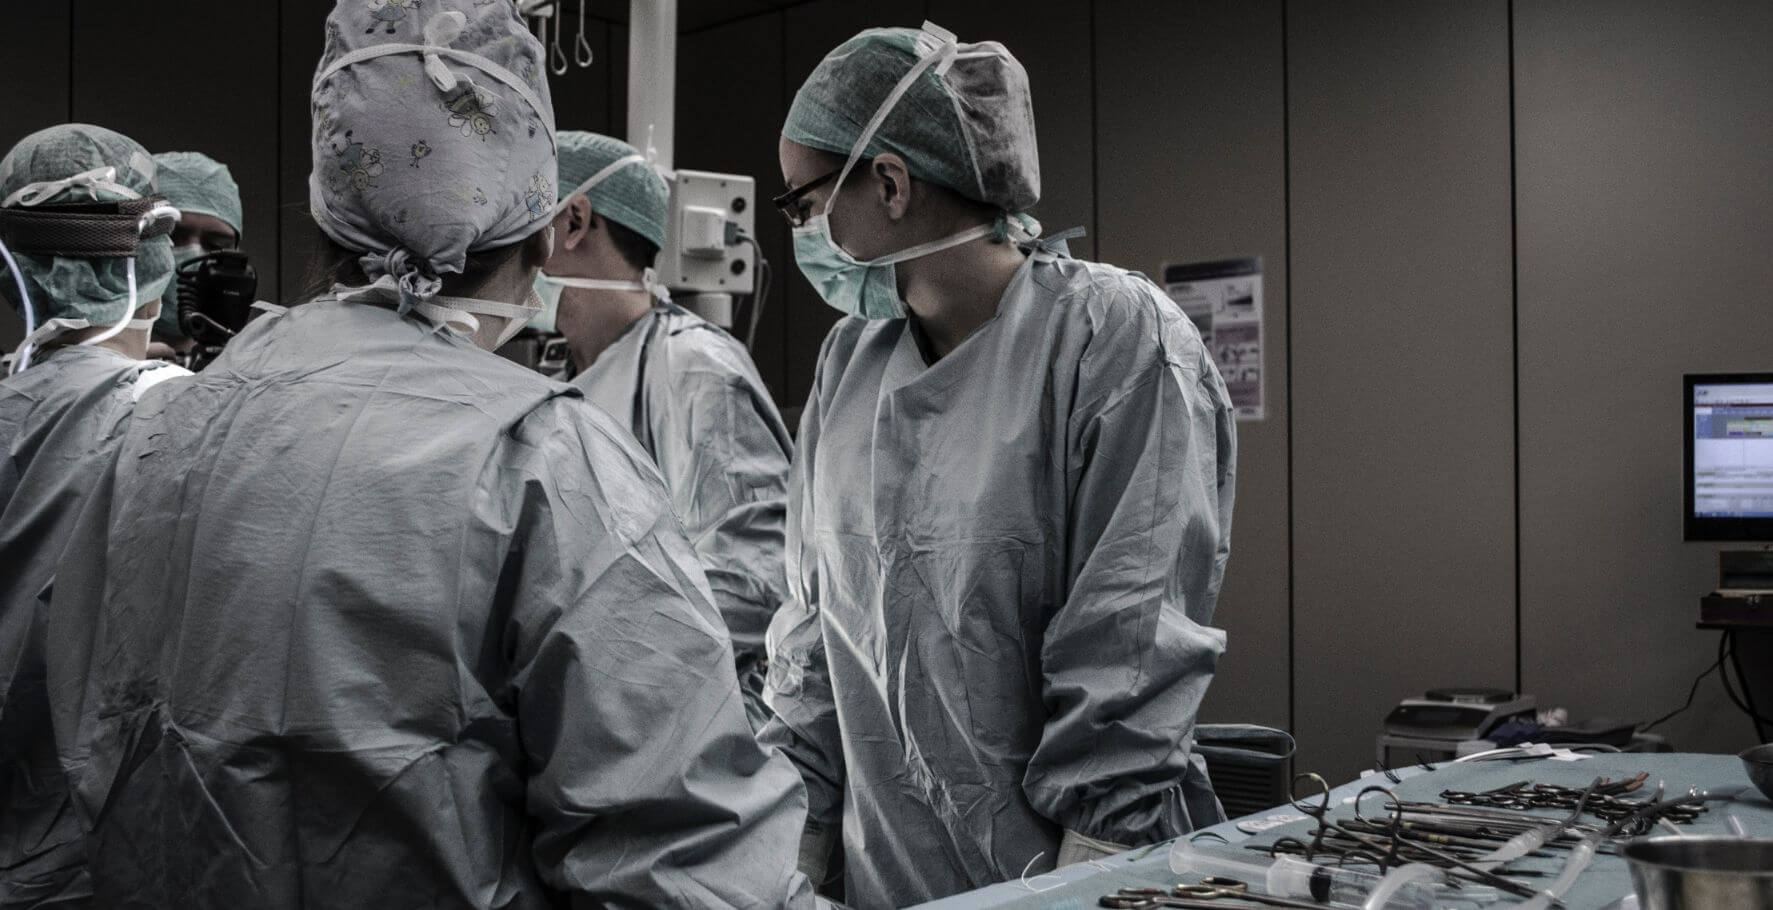 Medical students in an operating room